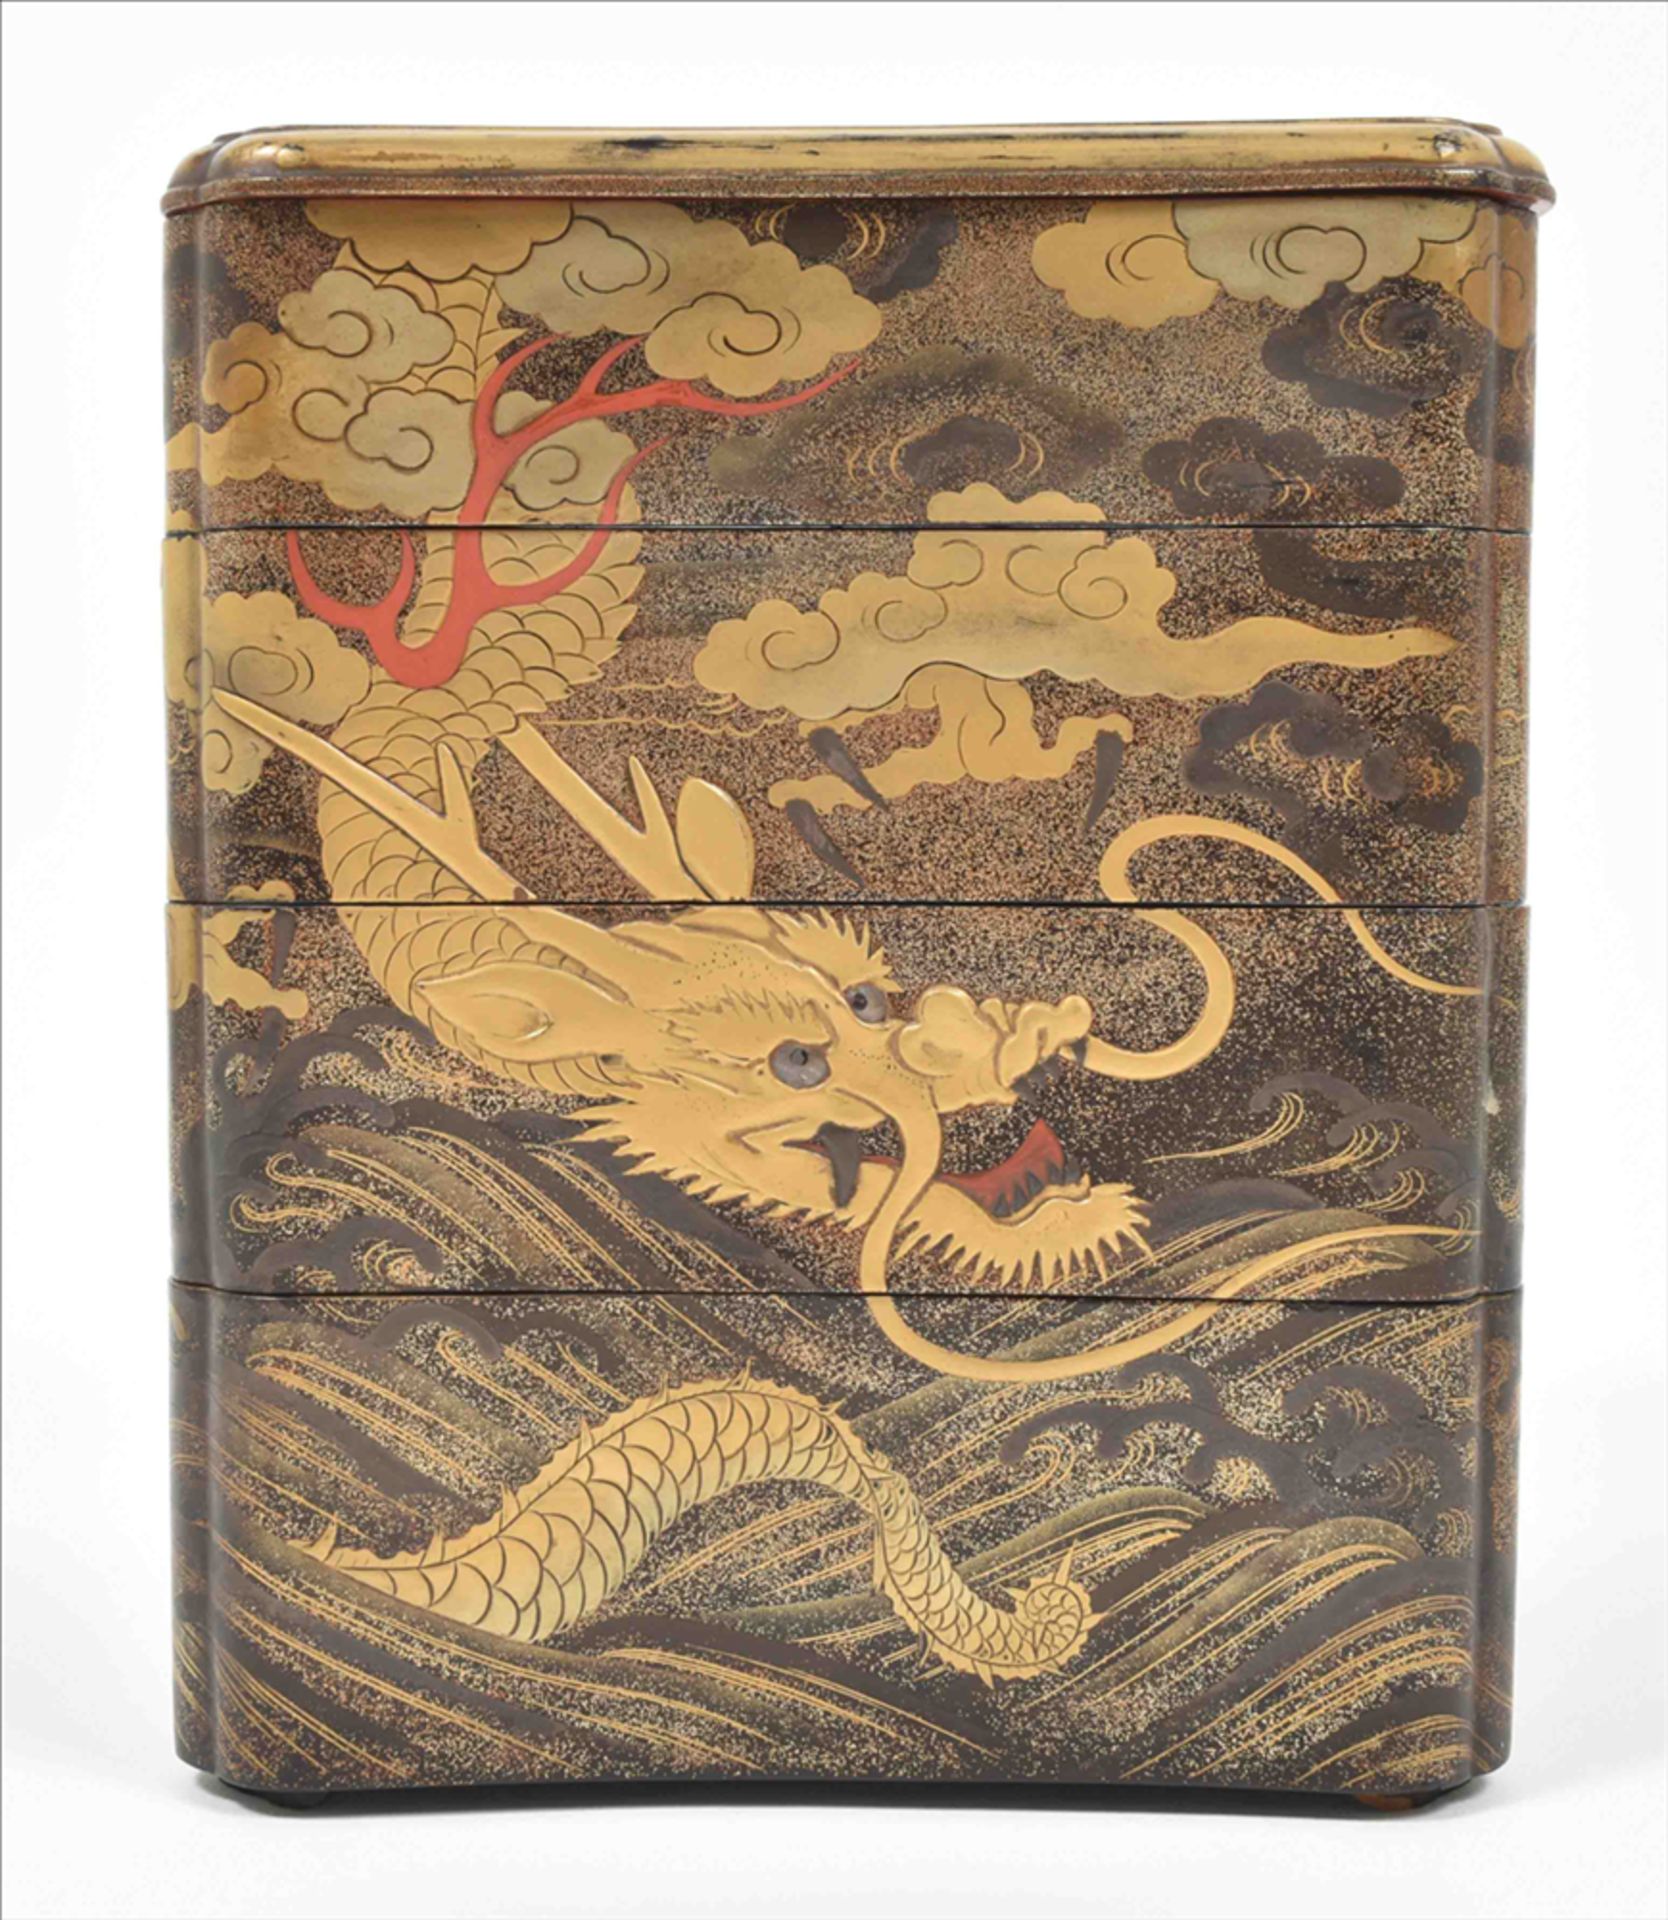 Four-tier Japanese lacquer jubako (food box) - Image 2 of 5